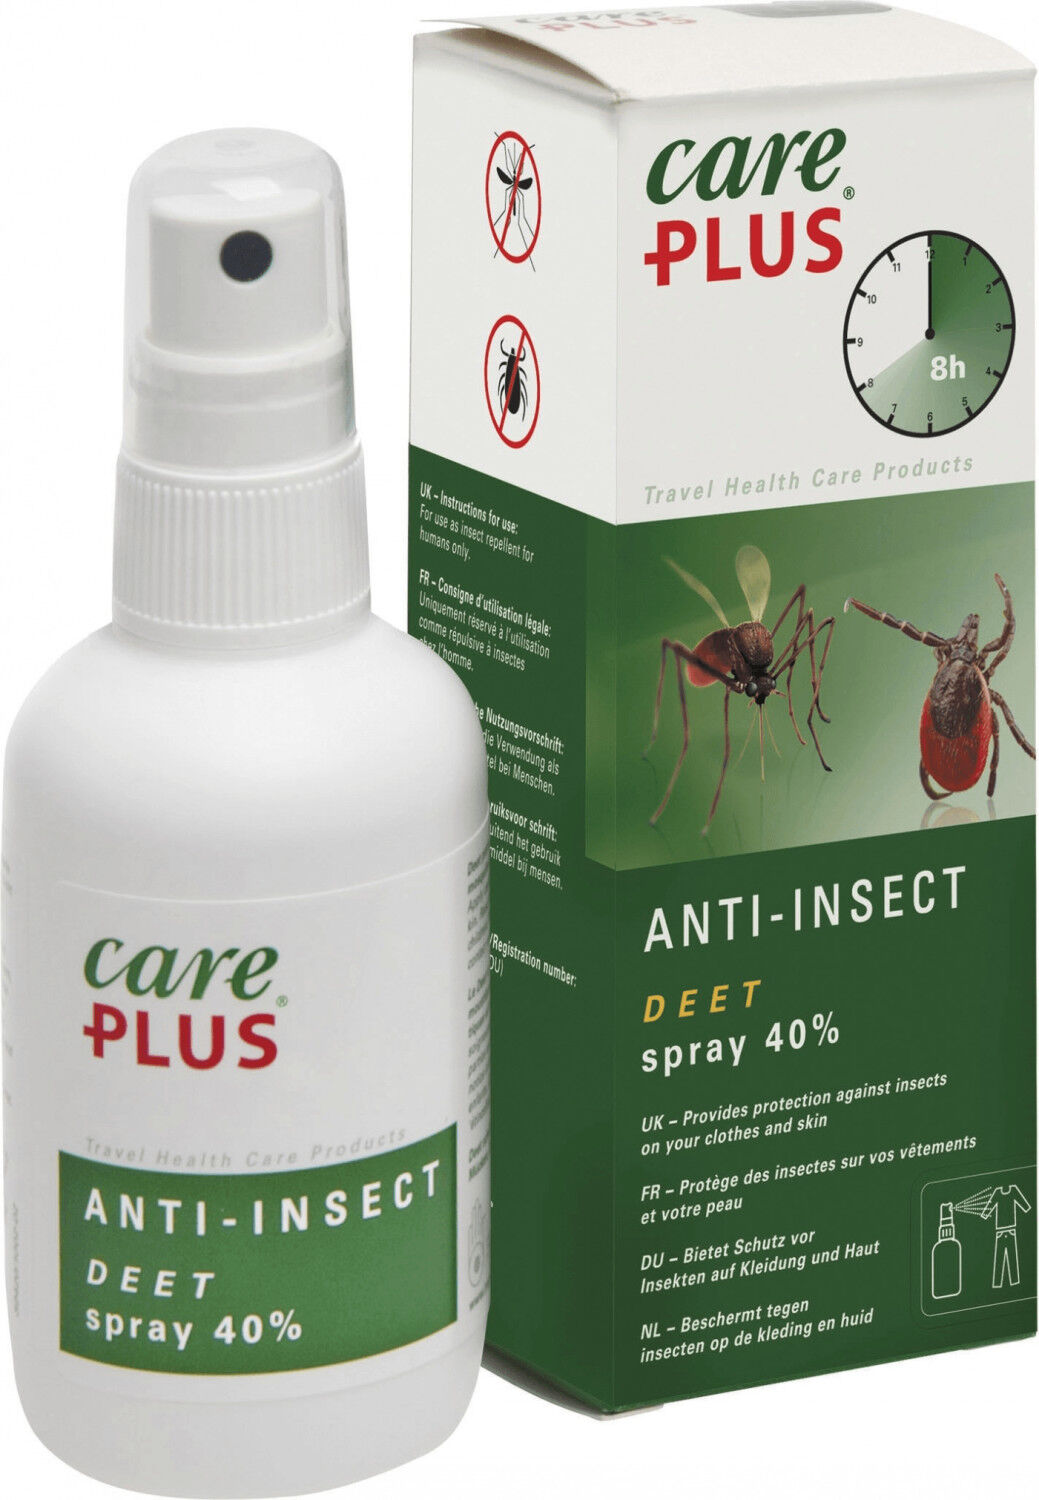 Care Plus Anti-Insect - Deet spray 40% - Insect repellent